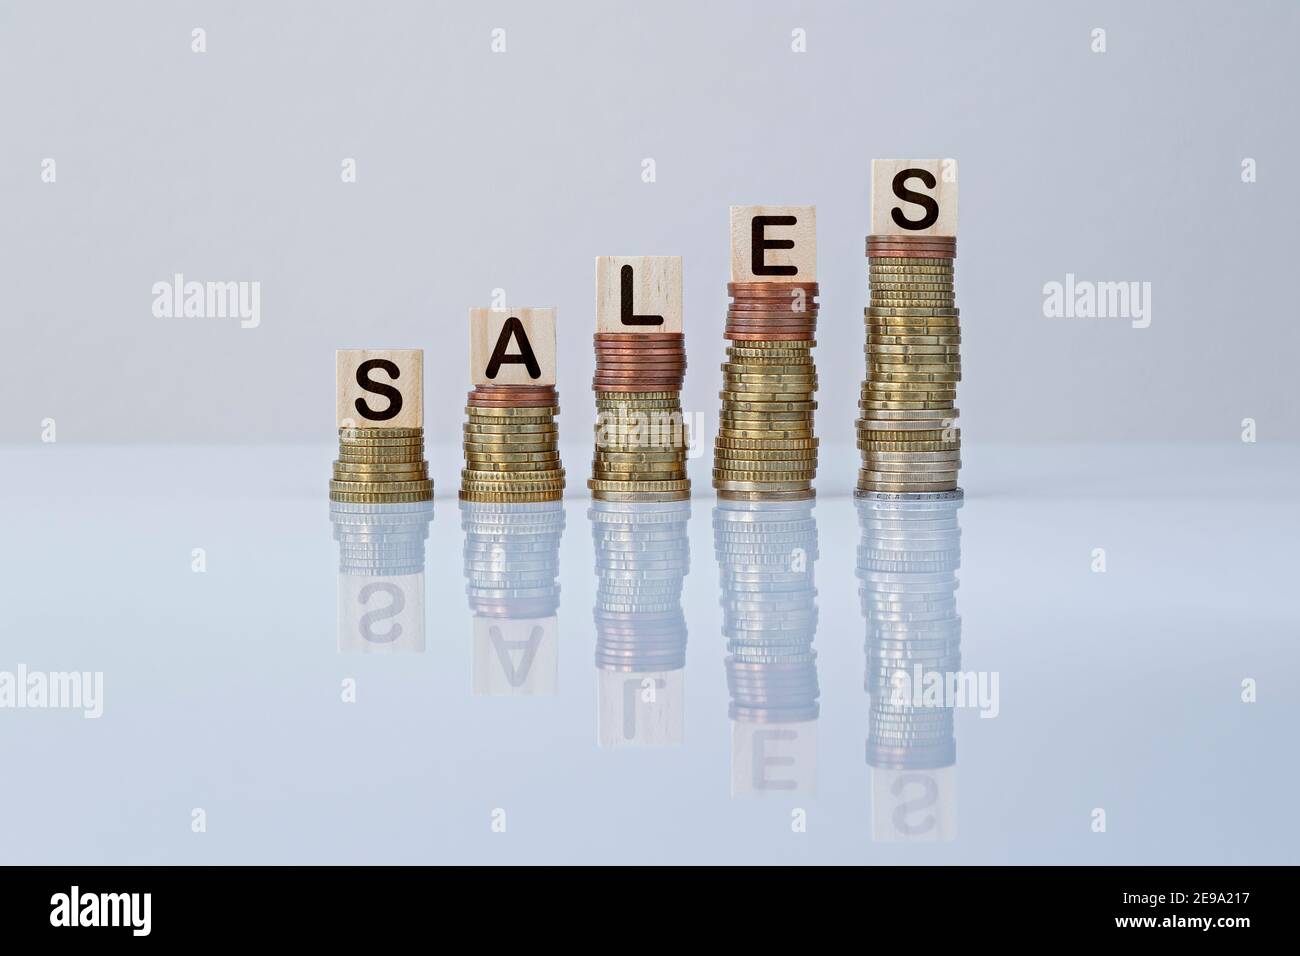 Word 'SALES' on wooden blocks on top of ascending stacks of coins on gray background. Concept of economy, business, finance, financial growth&success. Stock Photo